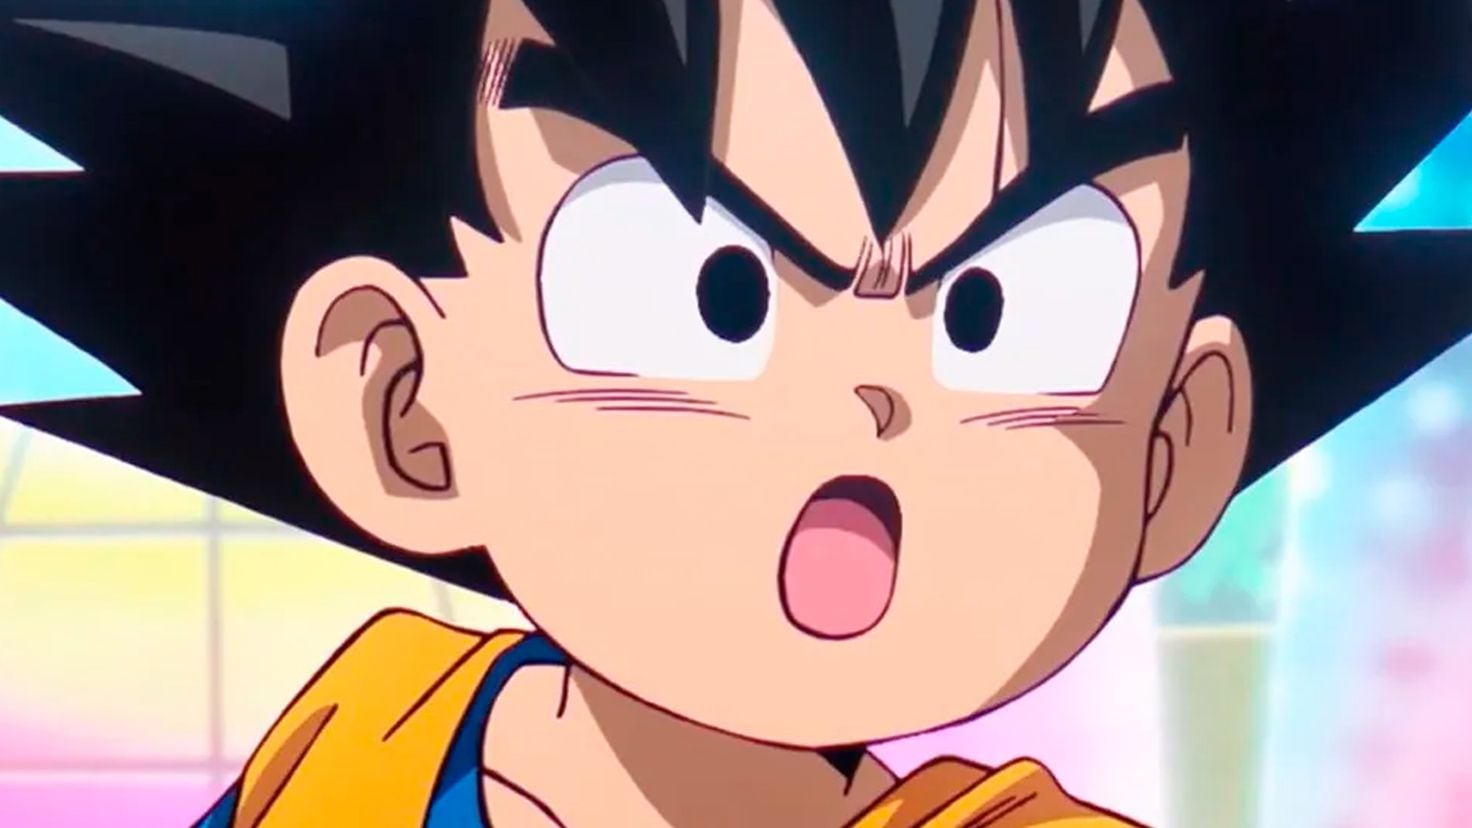 Dragon Ball Daima Release Date and Episodes Count Revealed?! 